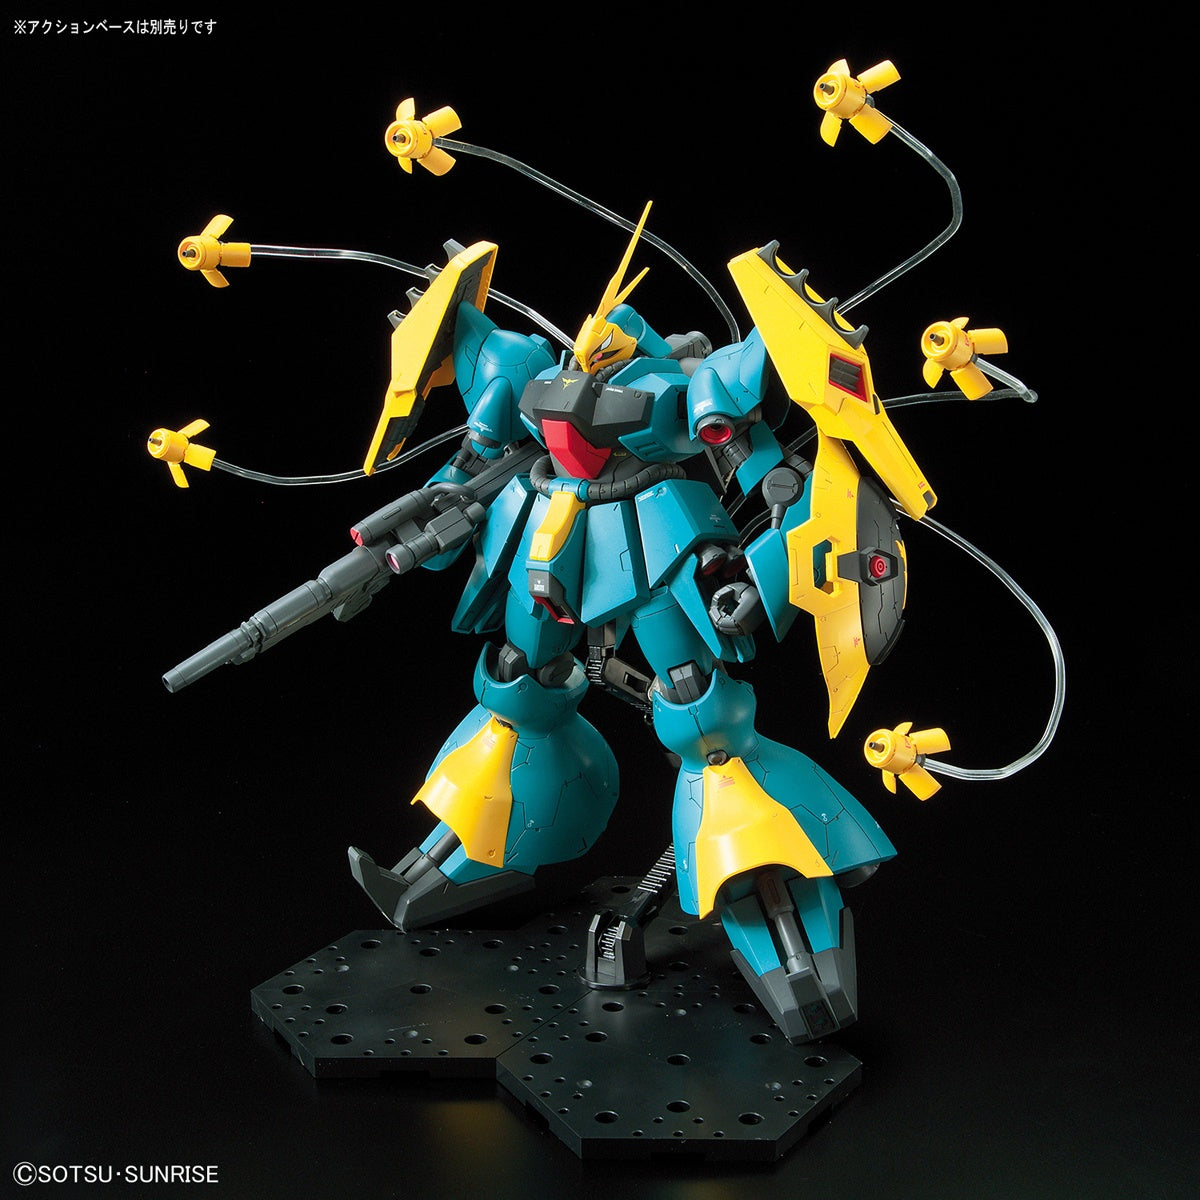 1/100 RE/100 Gyunei Guss&#39;s Jagd Doga-Bandai-Ace Cards &amp; Collectibles